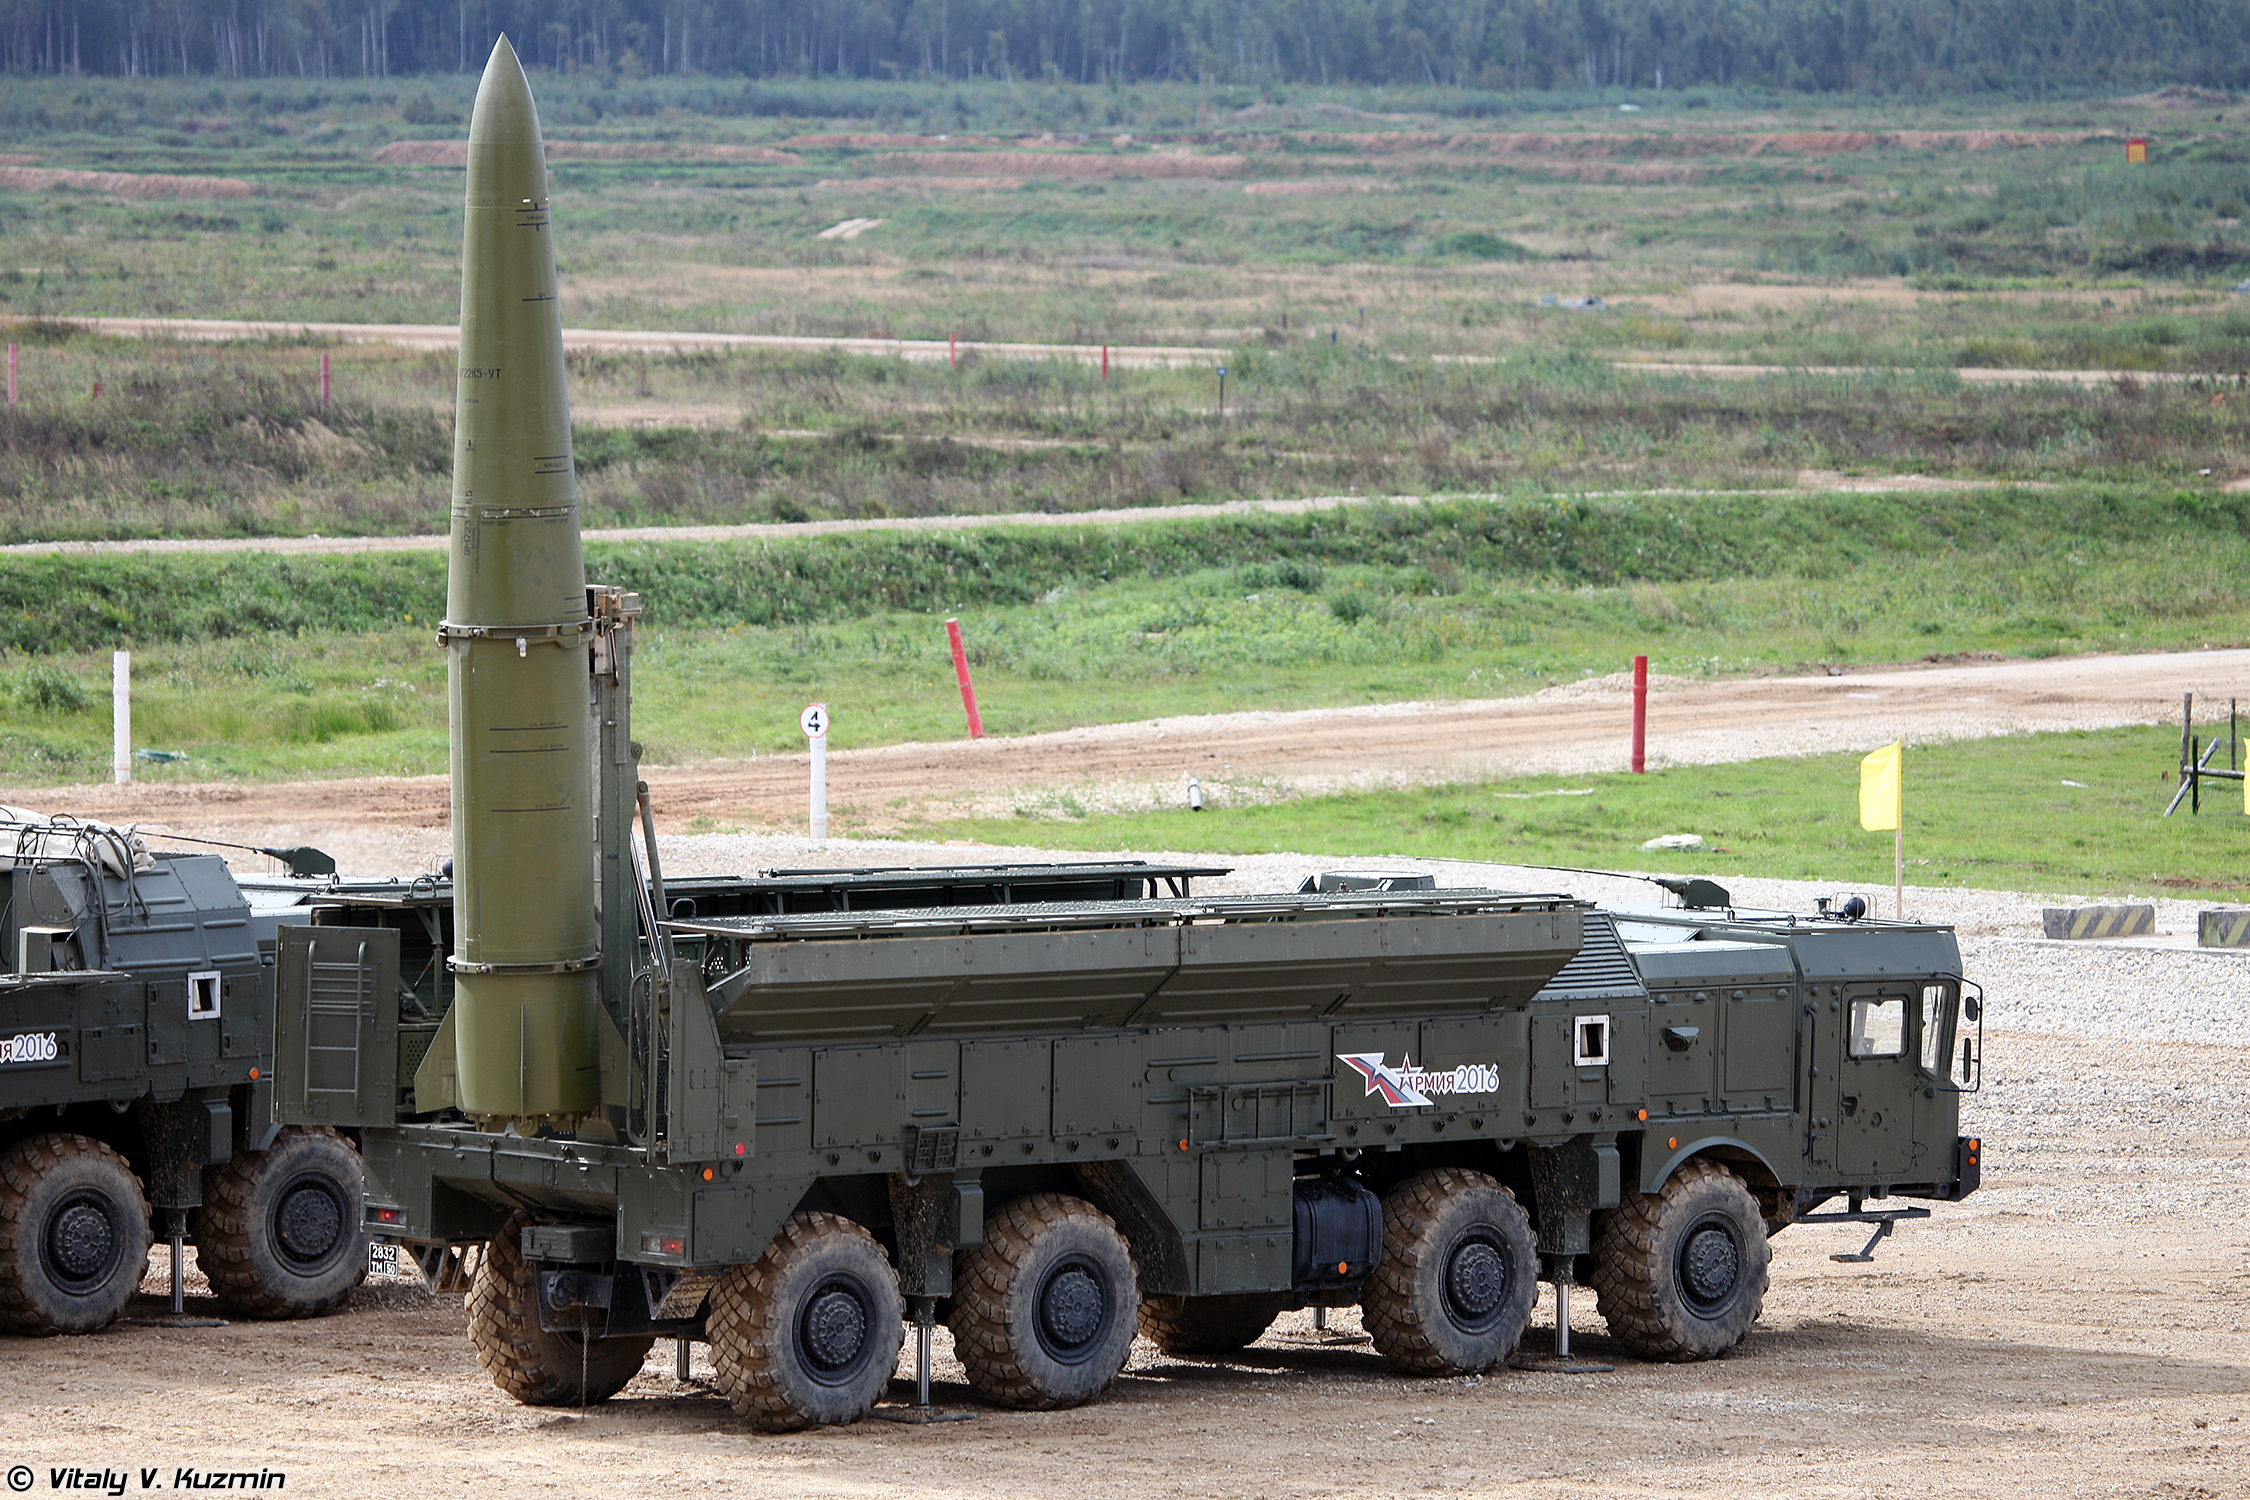 The Iskander missile—Russia's tactical weapons that can fill strategic aims